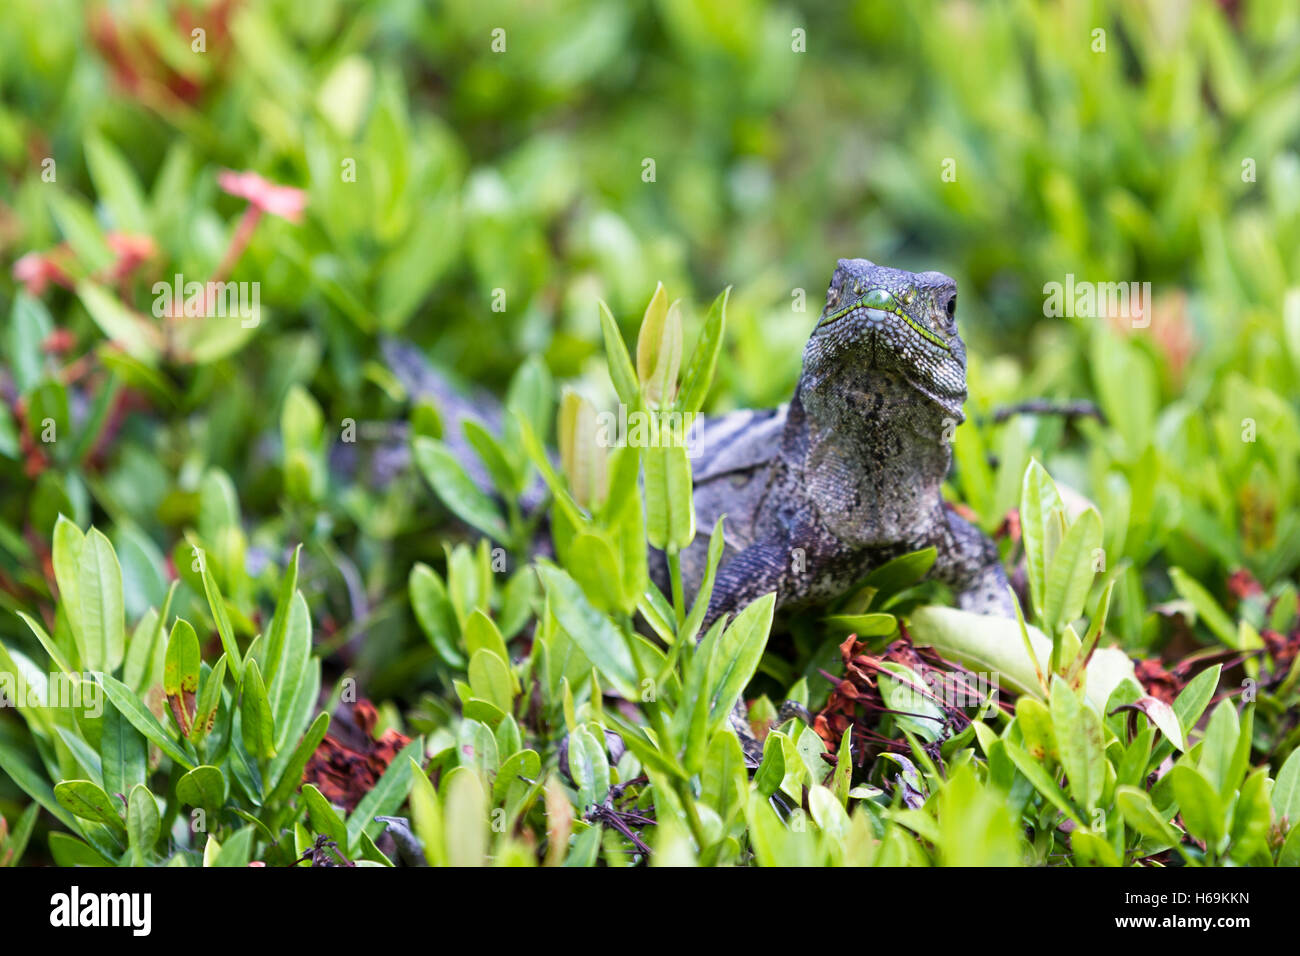 close up of a club tailed iguana walking on top of green bushes Stock Photo